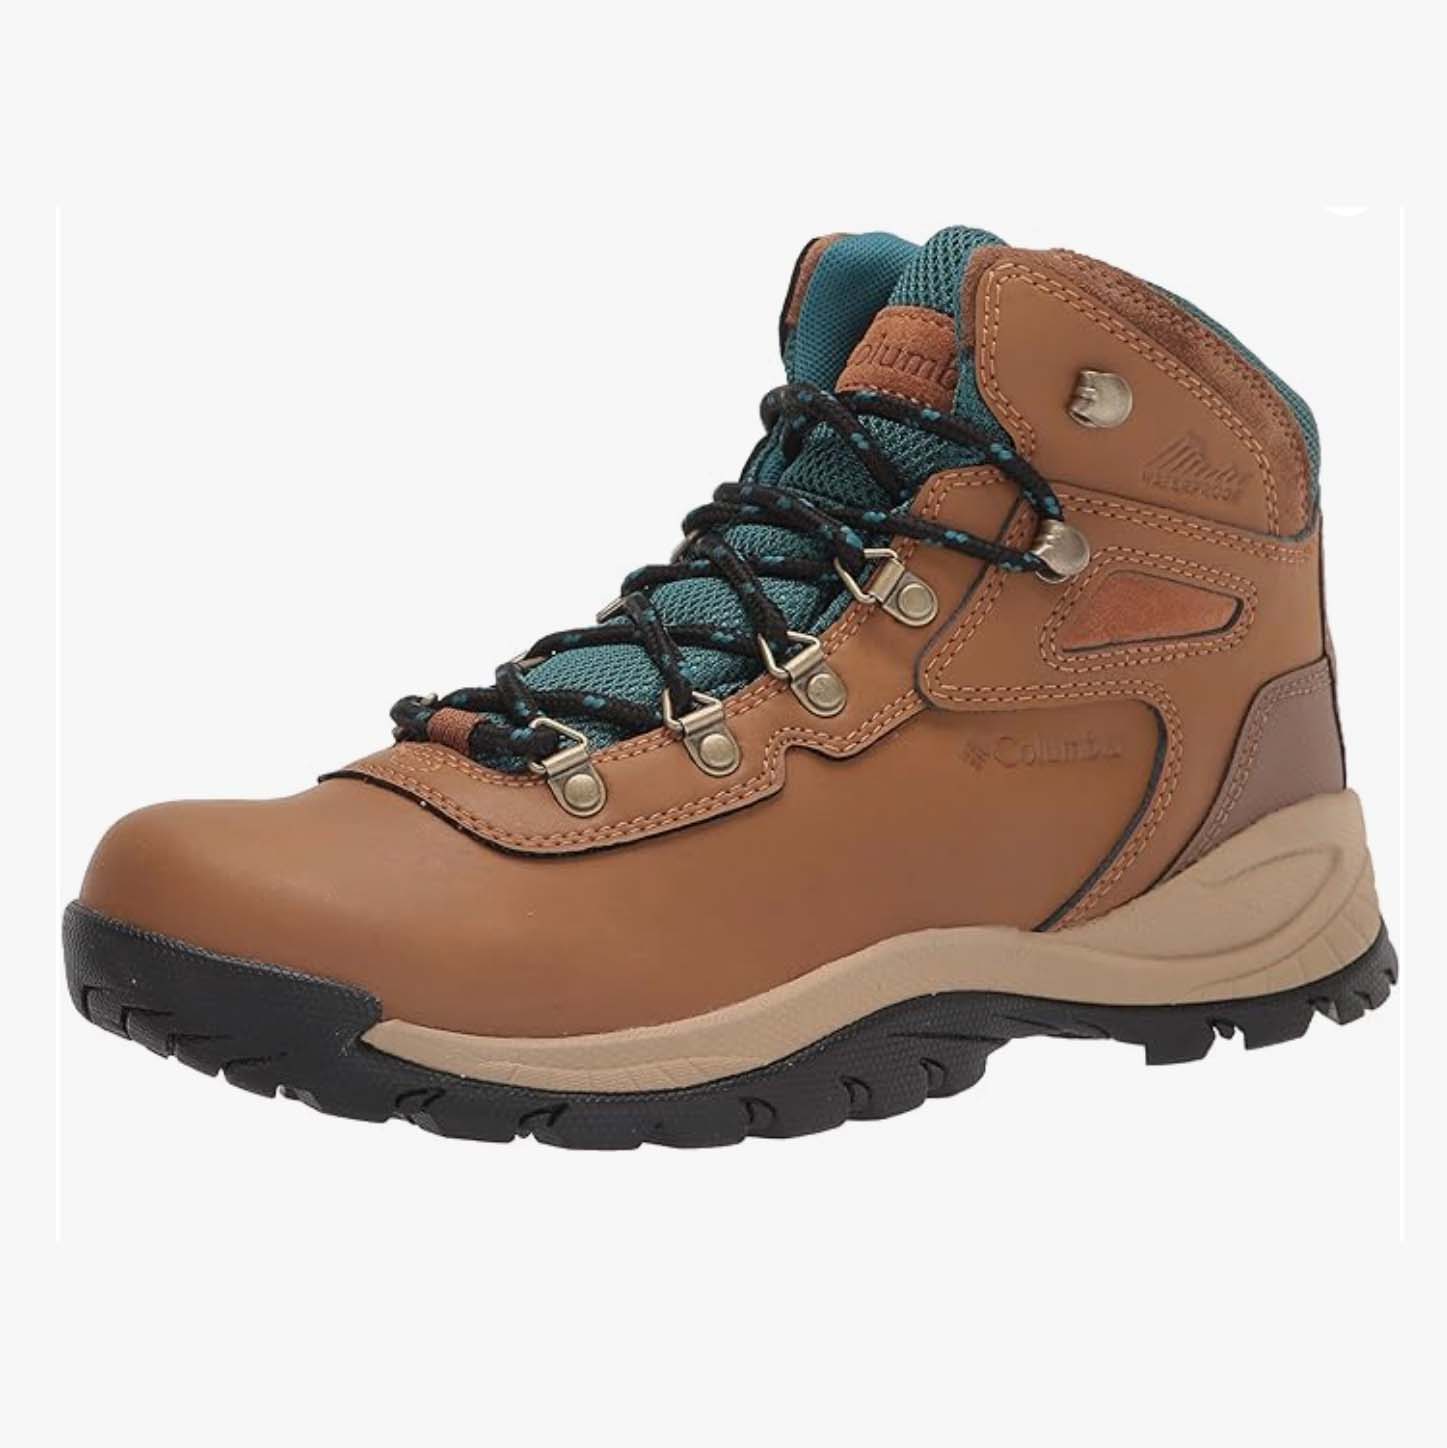 Brown and blue hiking boots